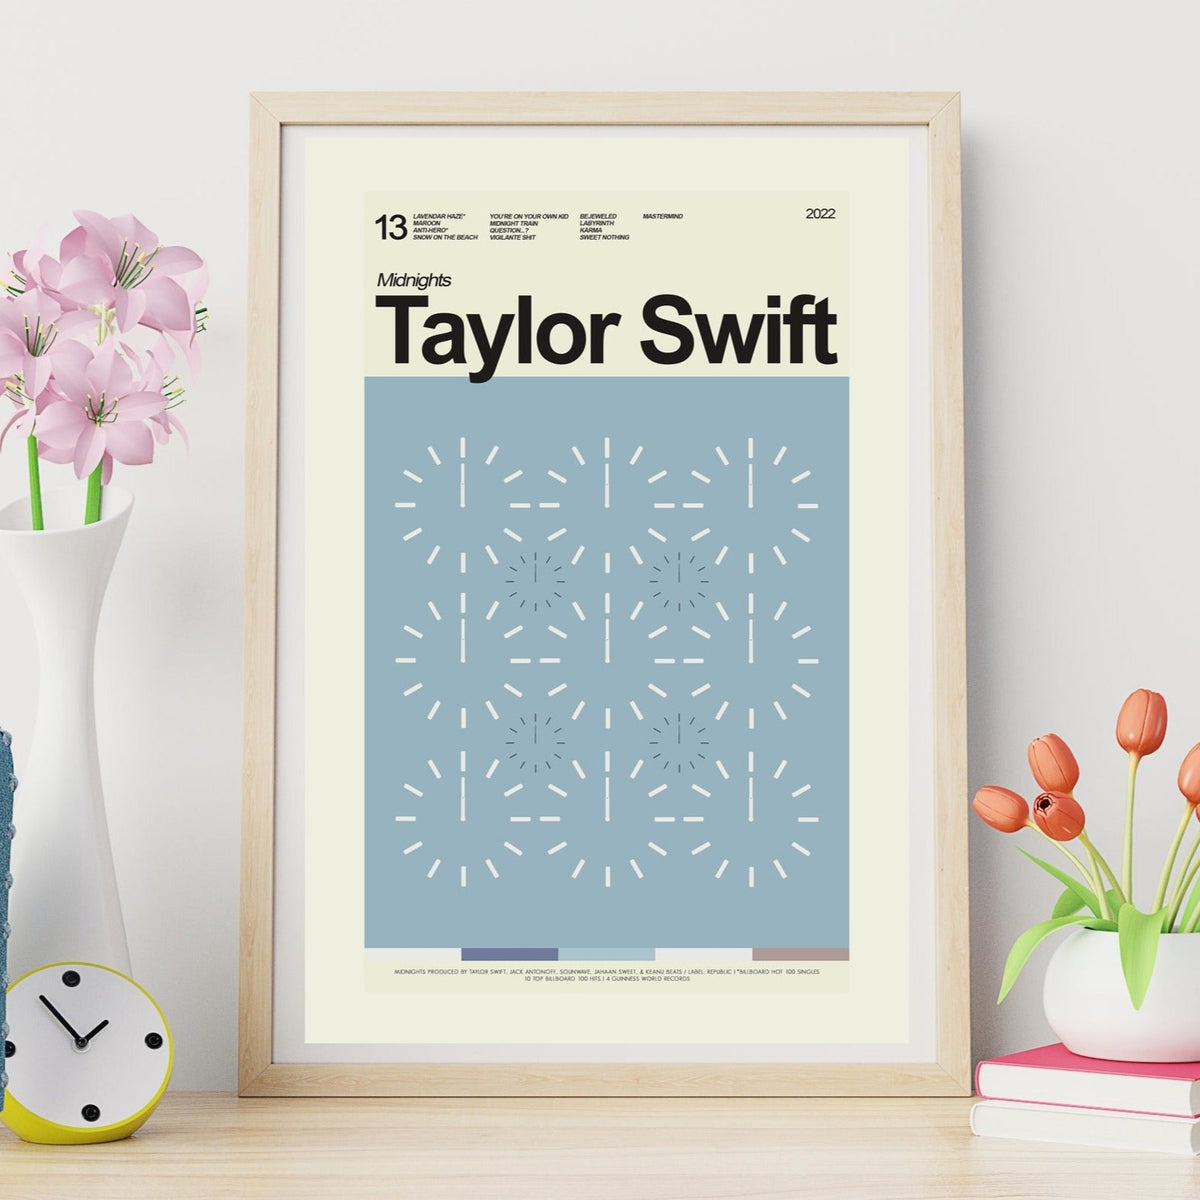 Taylor Swift - Midnights (Album) Inspired | 12"x18" or 18"x24" Print only